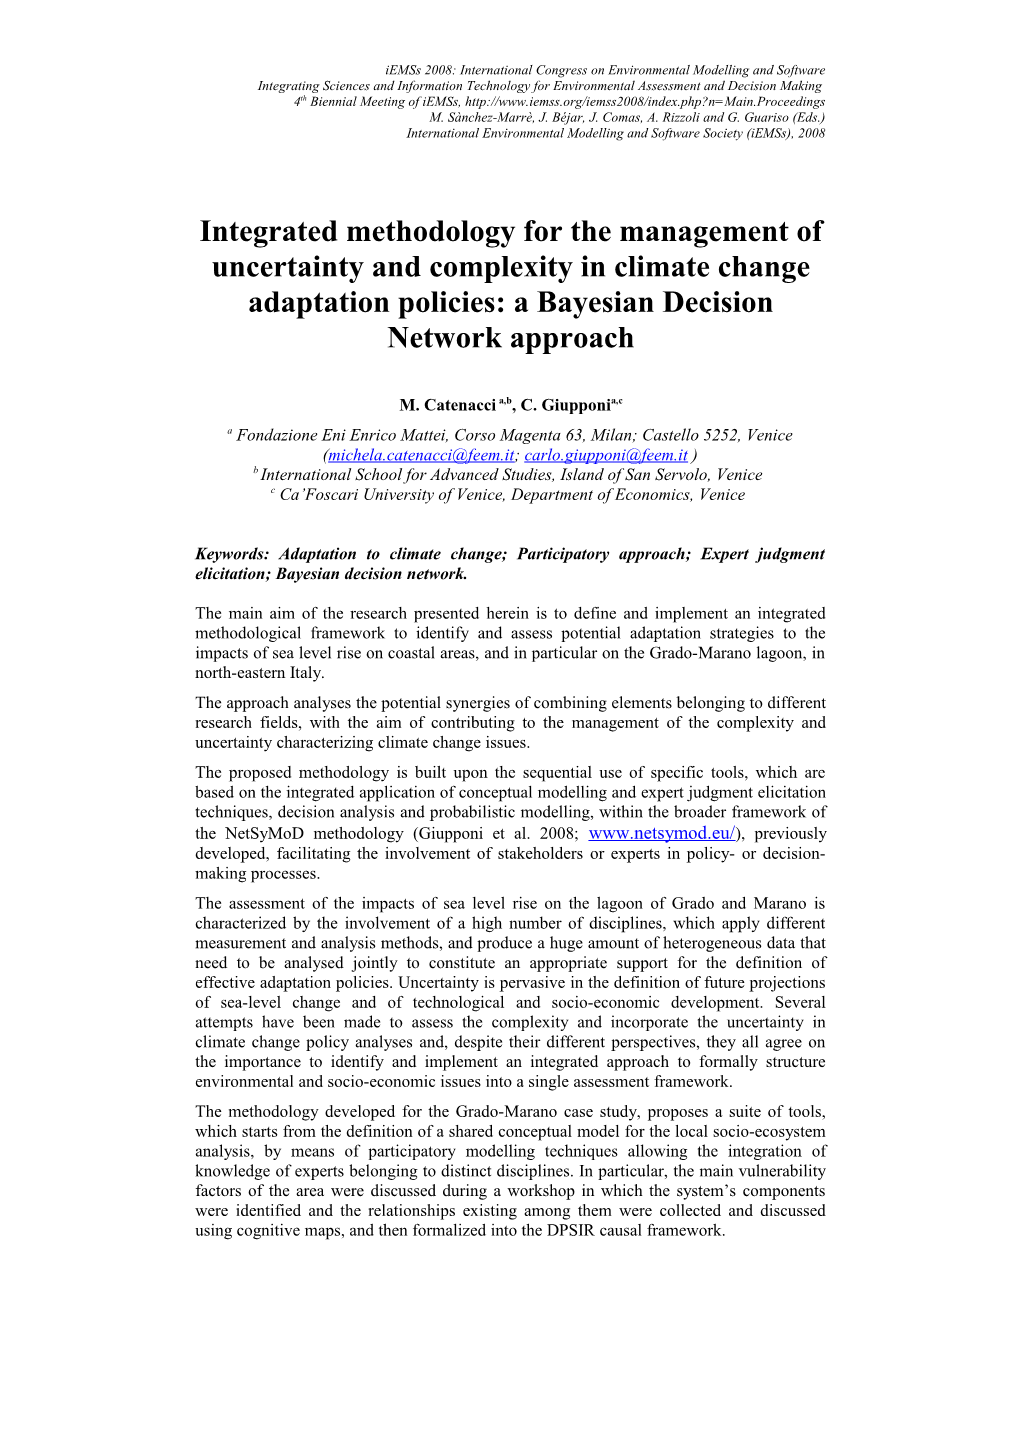 Integrated Methodology for the Management of Uncertainty and Complexity in Climate Change